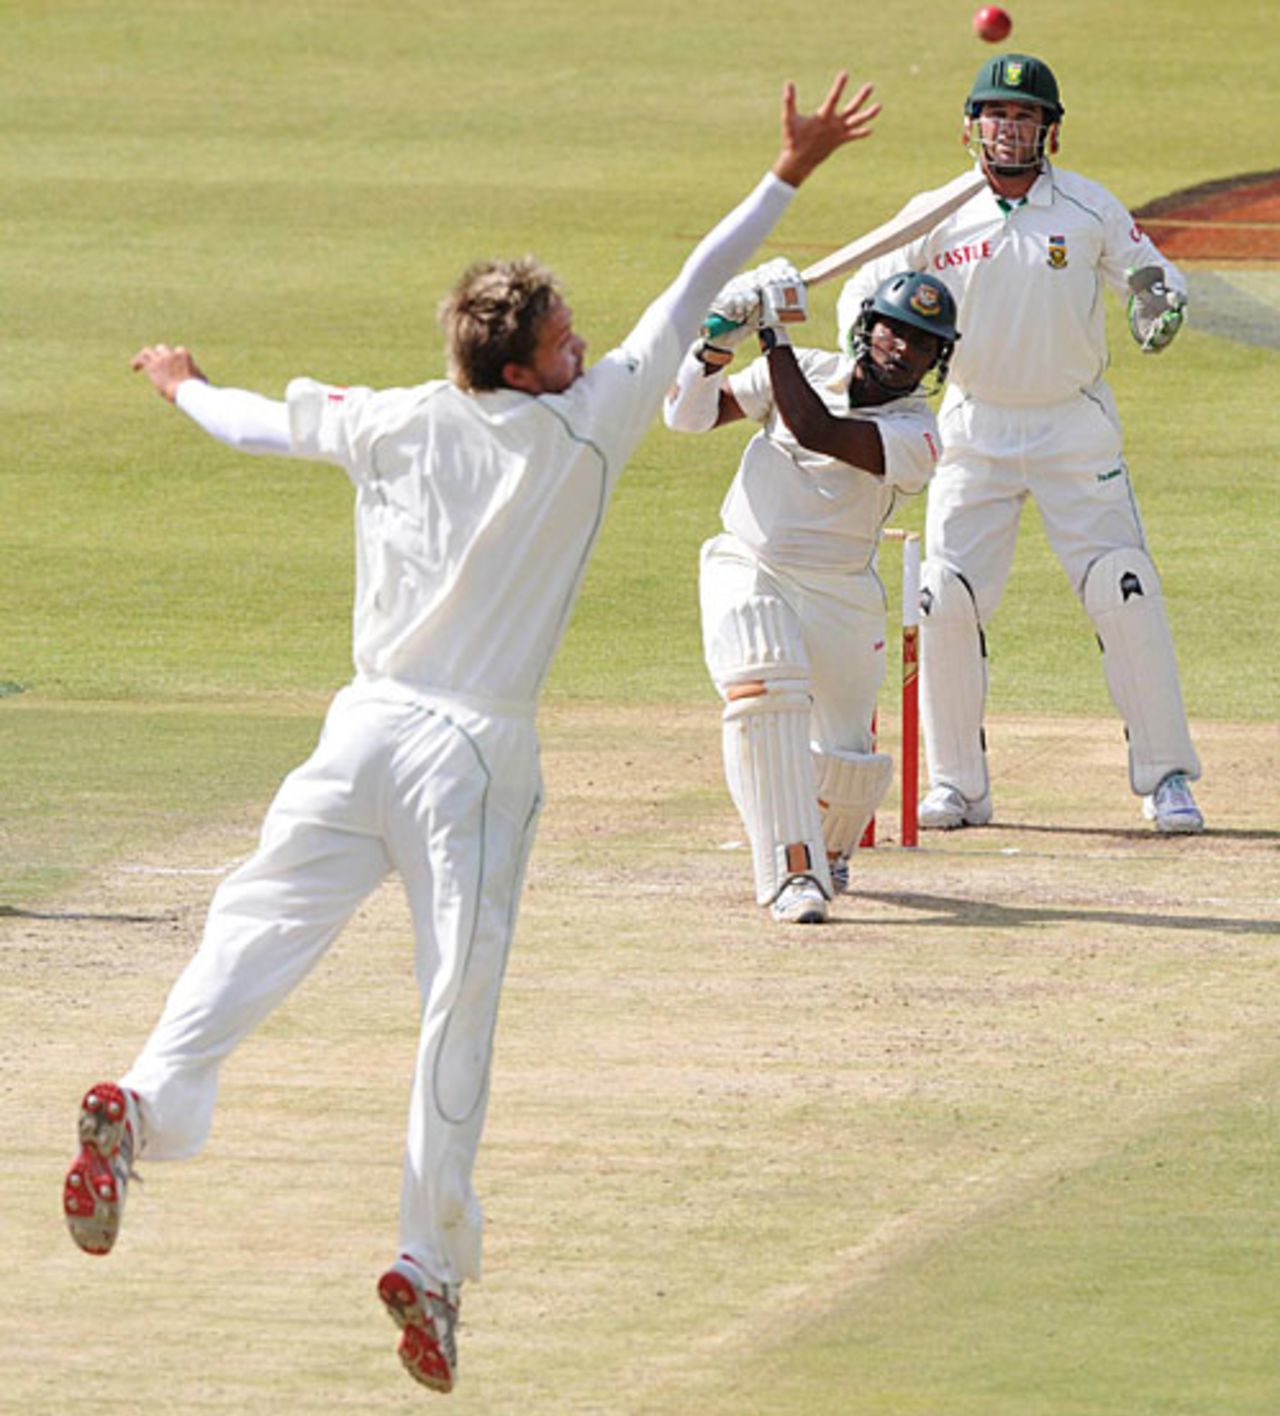 Paul Harris fails to get a hand at the ball hit by Imrul Kayes, South Africa v Bangladesh, 1st Test, Bloemfontein, November 20, 2008